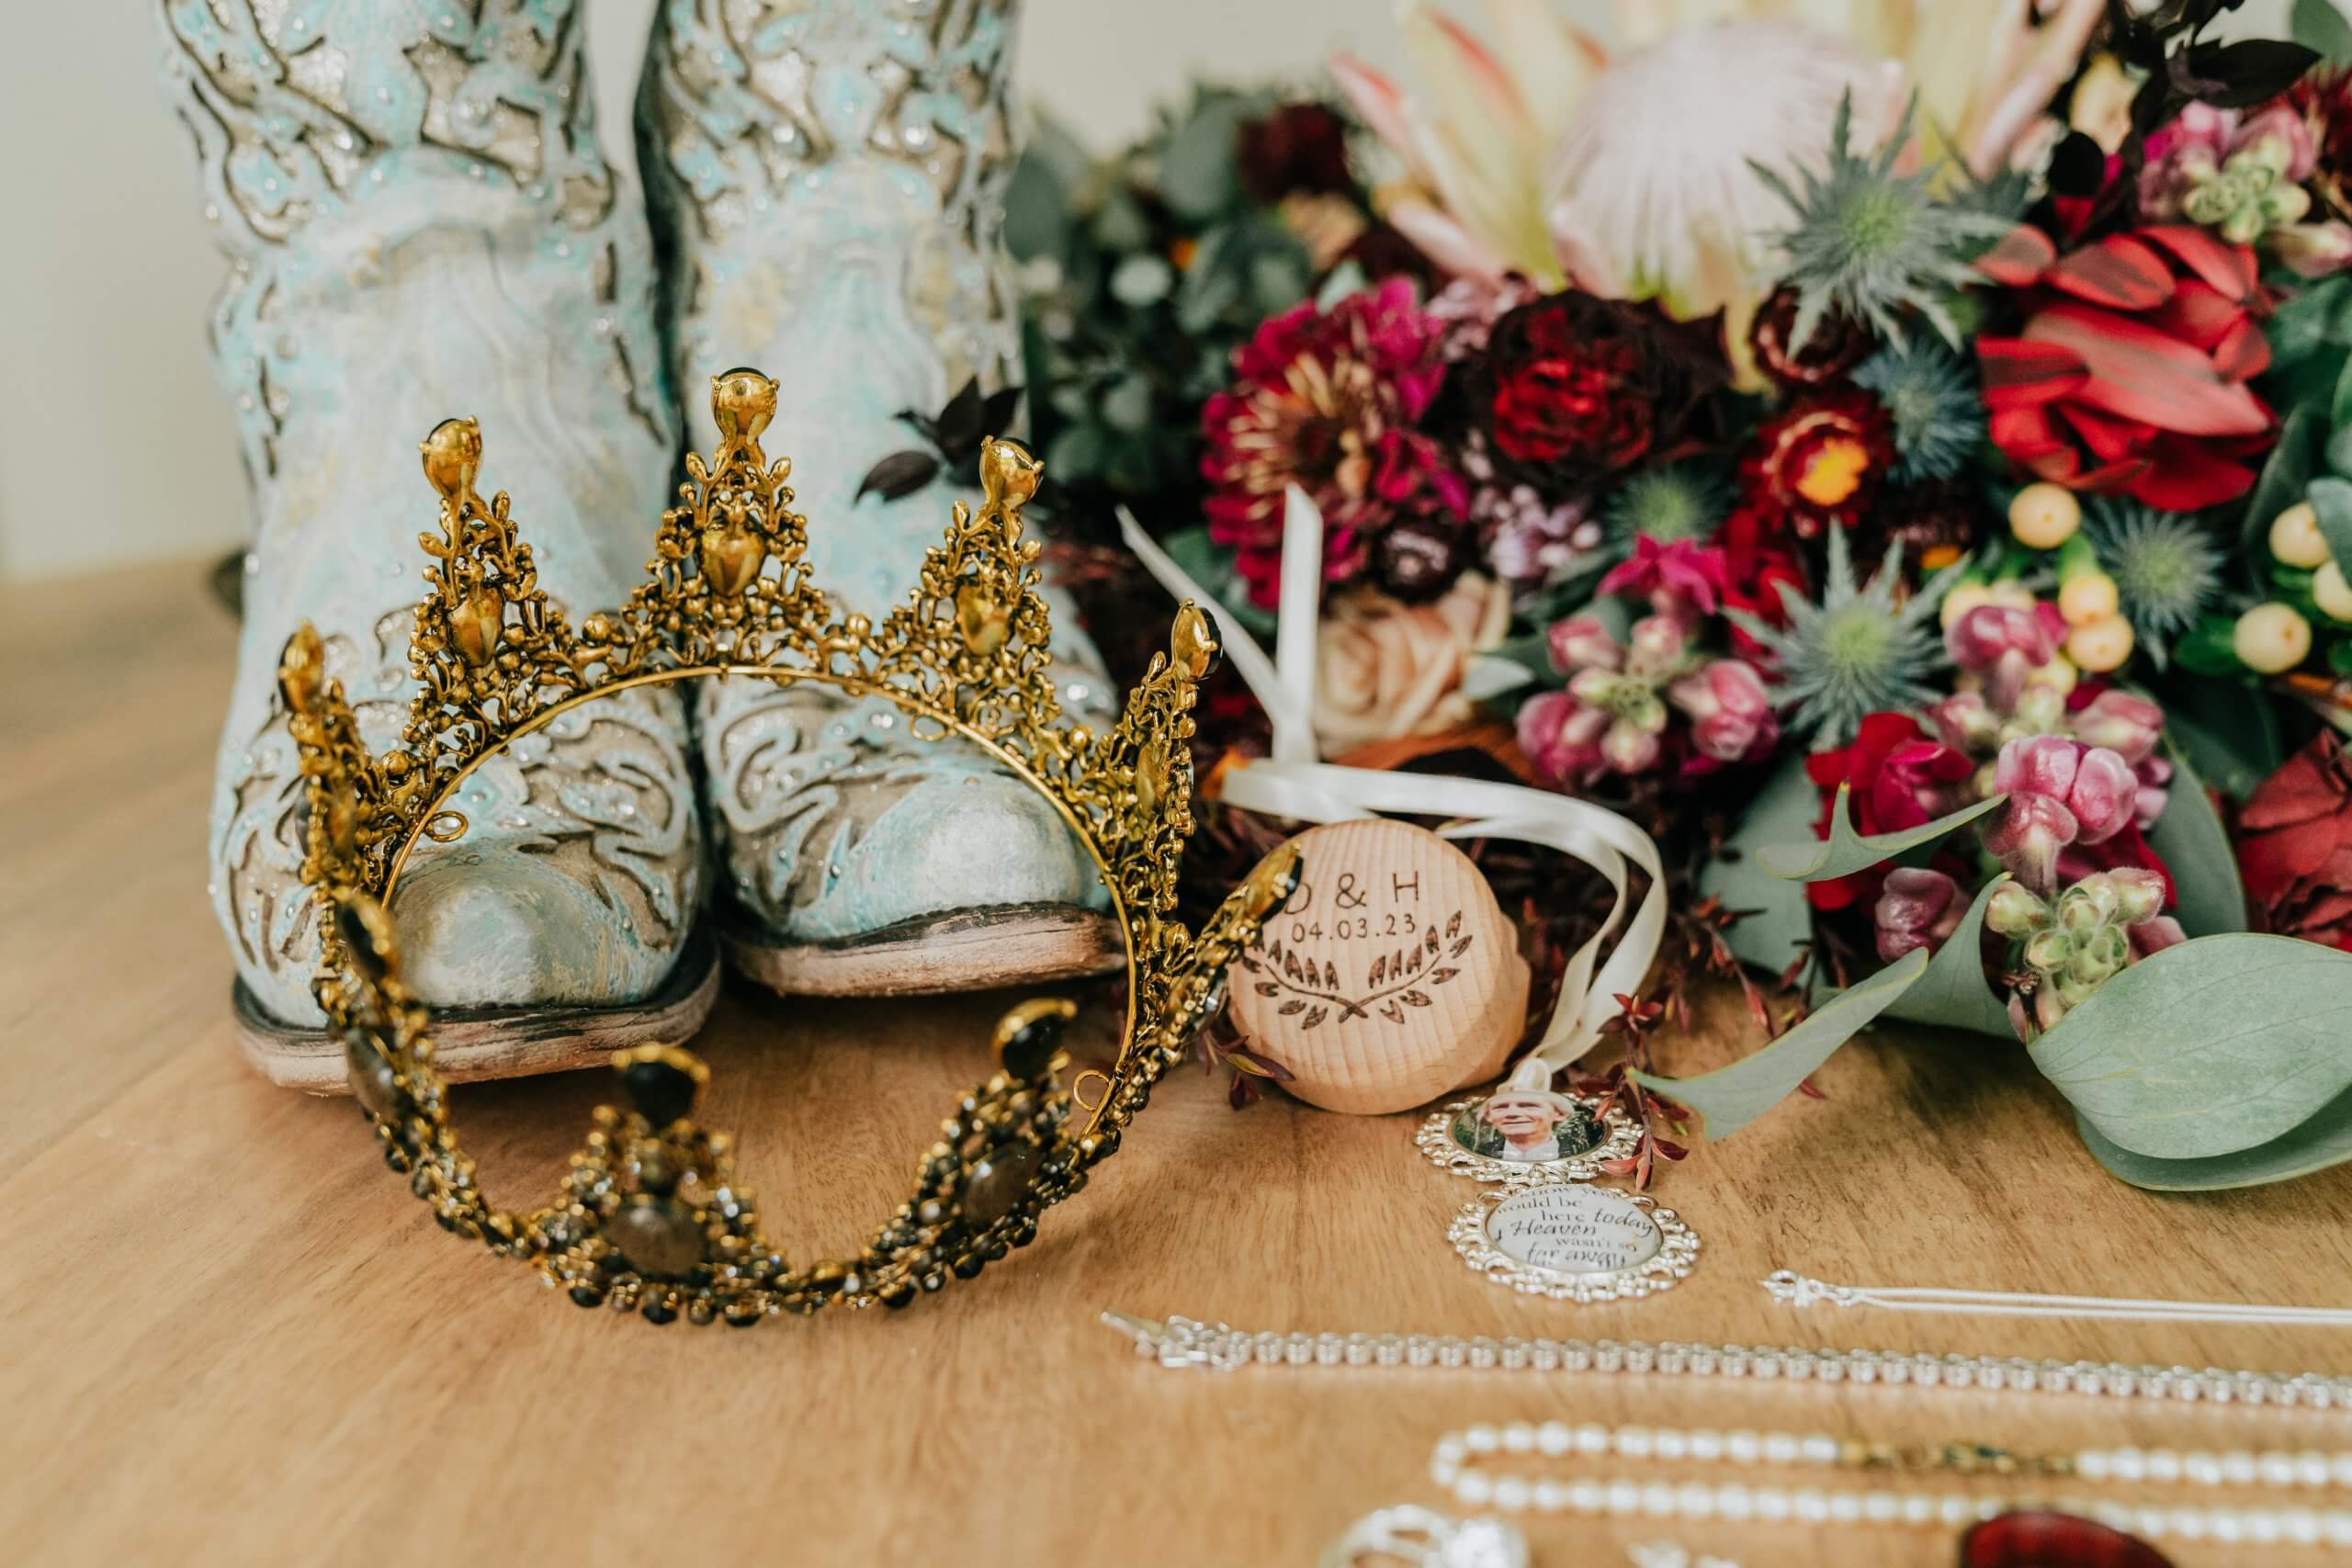 Beautiful wedding details - a crown, accessories, blue boots, and rustic wedding flowers.